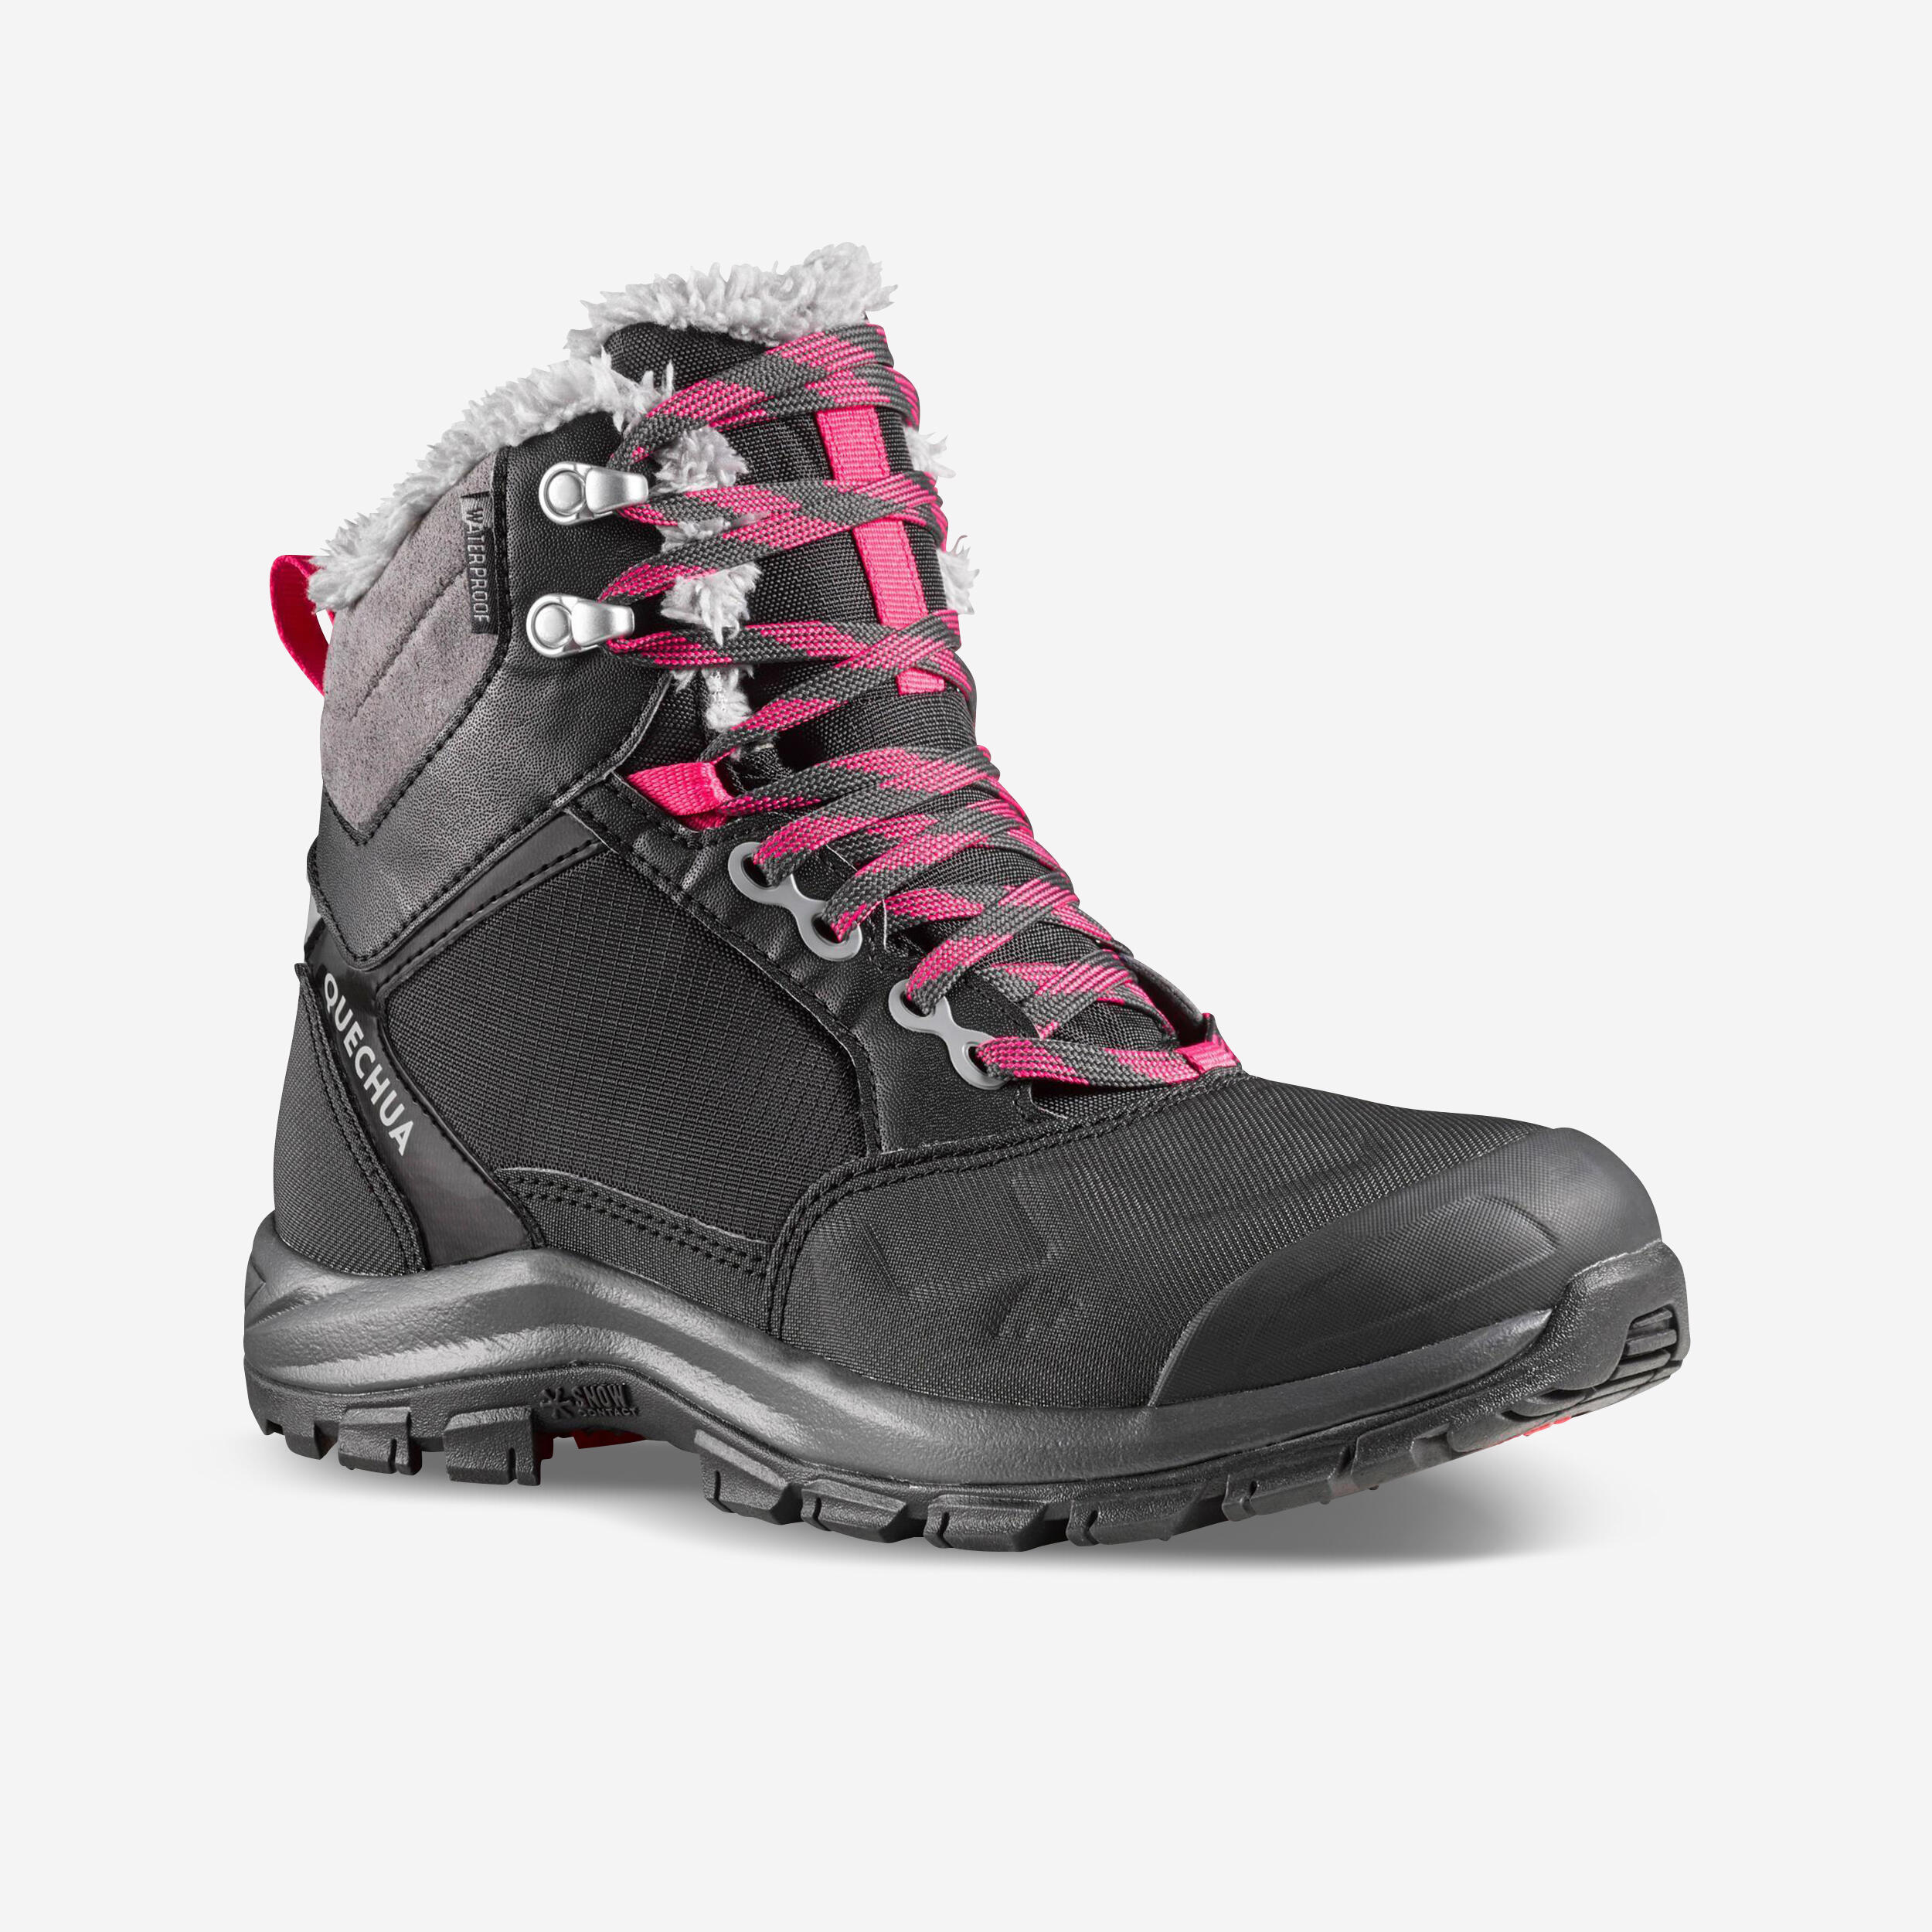 Women's Warm and Waterproof Hiking Boots - SH500 mountain MID 1/9